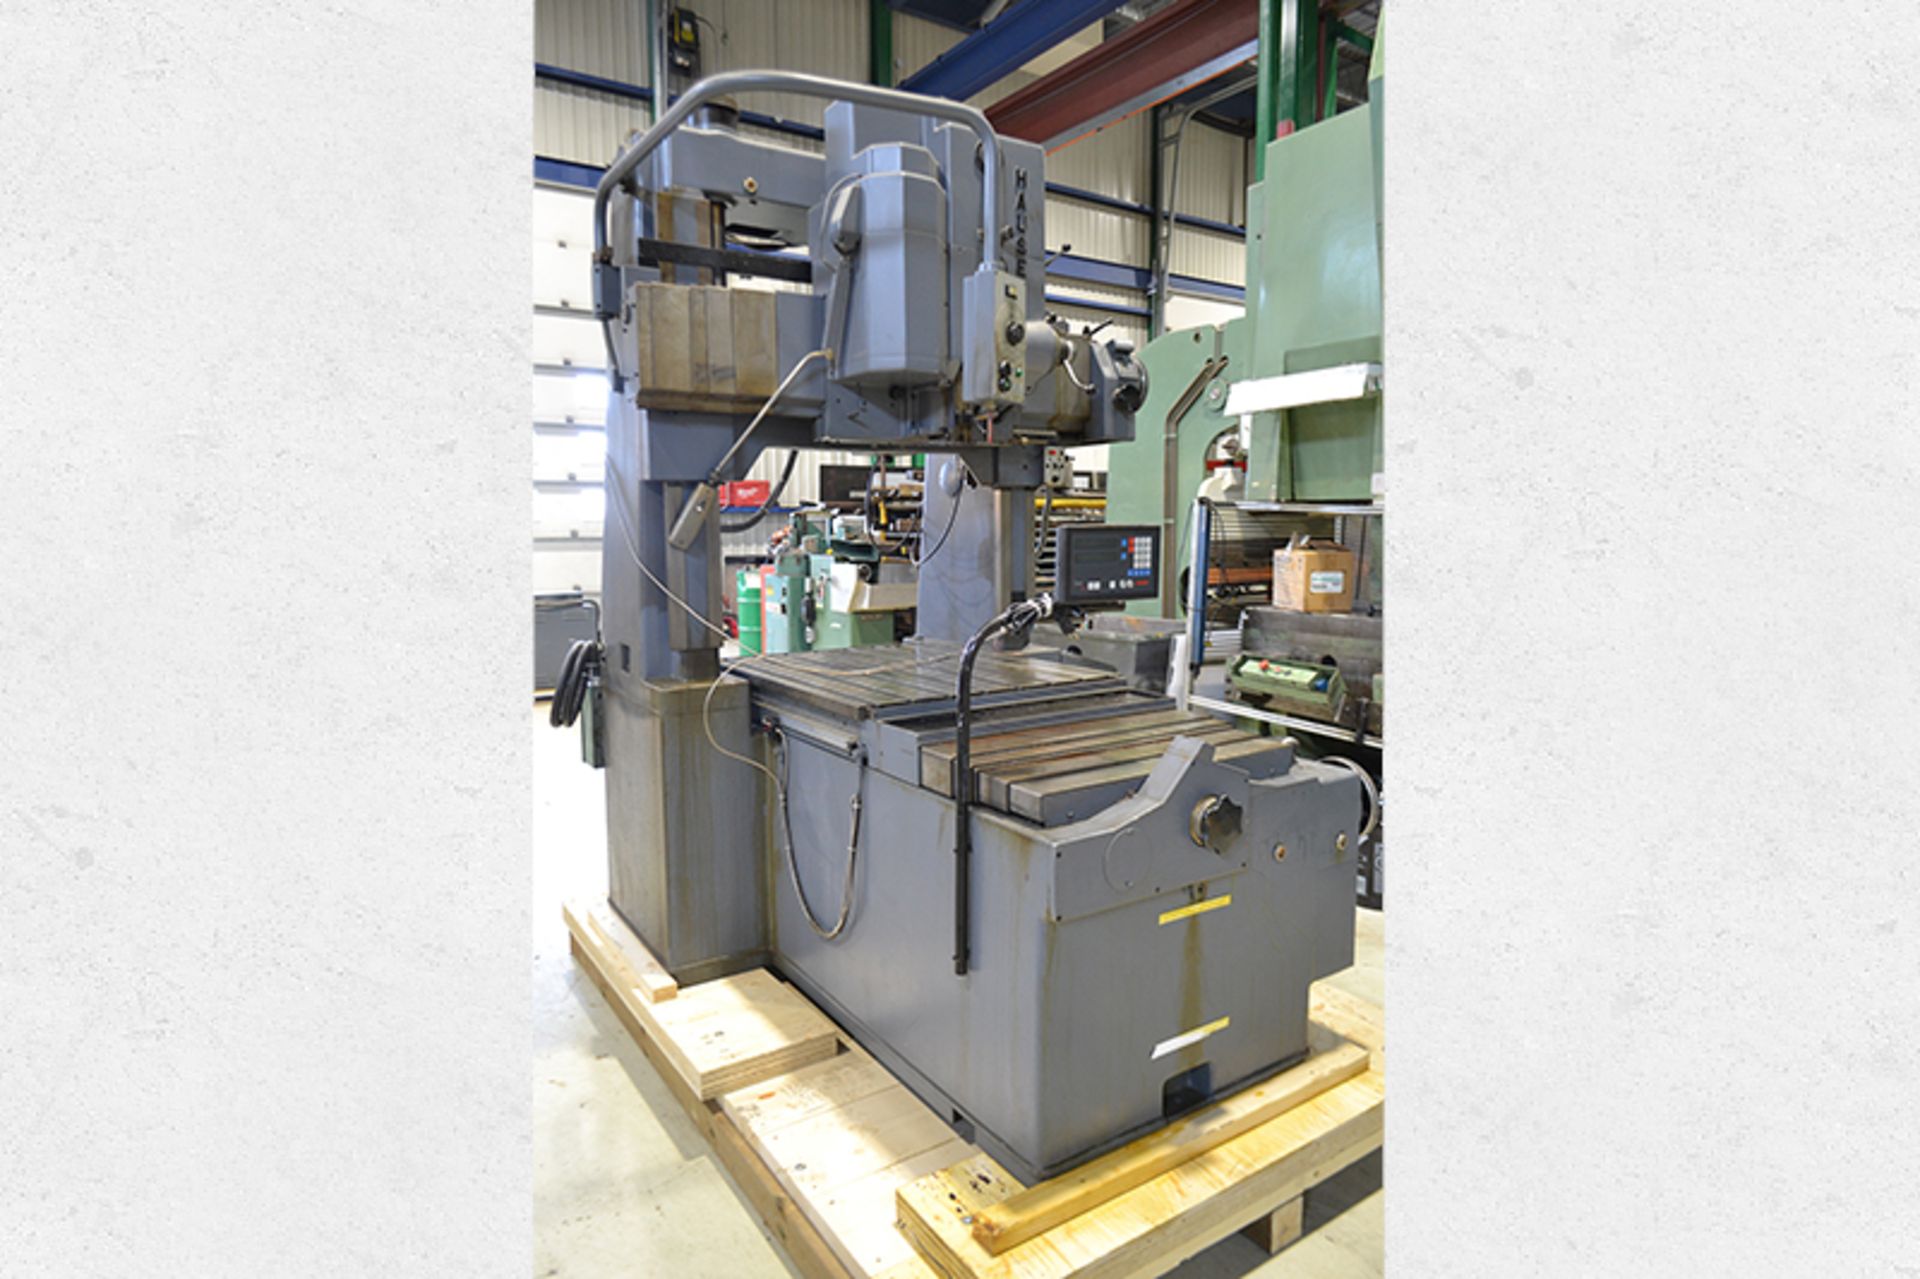 HAUSER JIG BORER MOD. M5, 35" X 30" TABLE, W/ (1) 19-1/2" ROTARY TABLE, 12" TILTING ROTARY TABLE, - Image 2 of 10